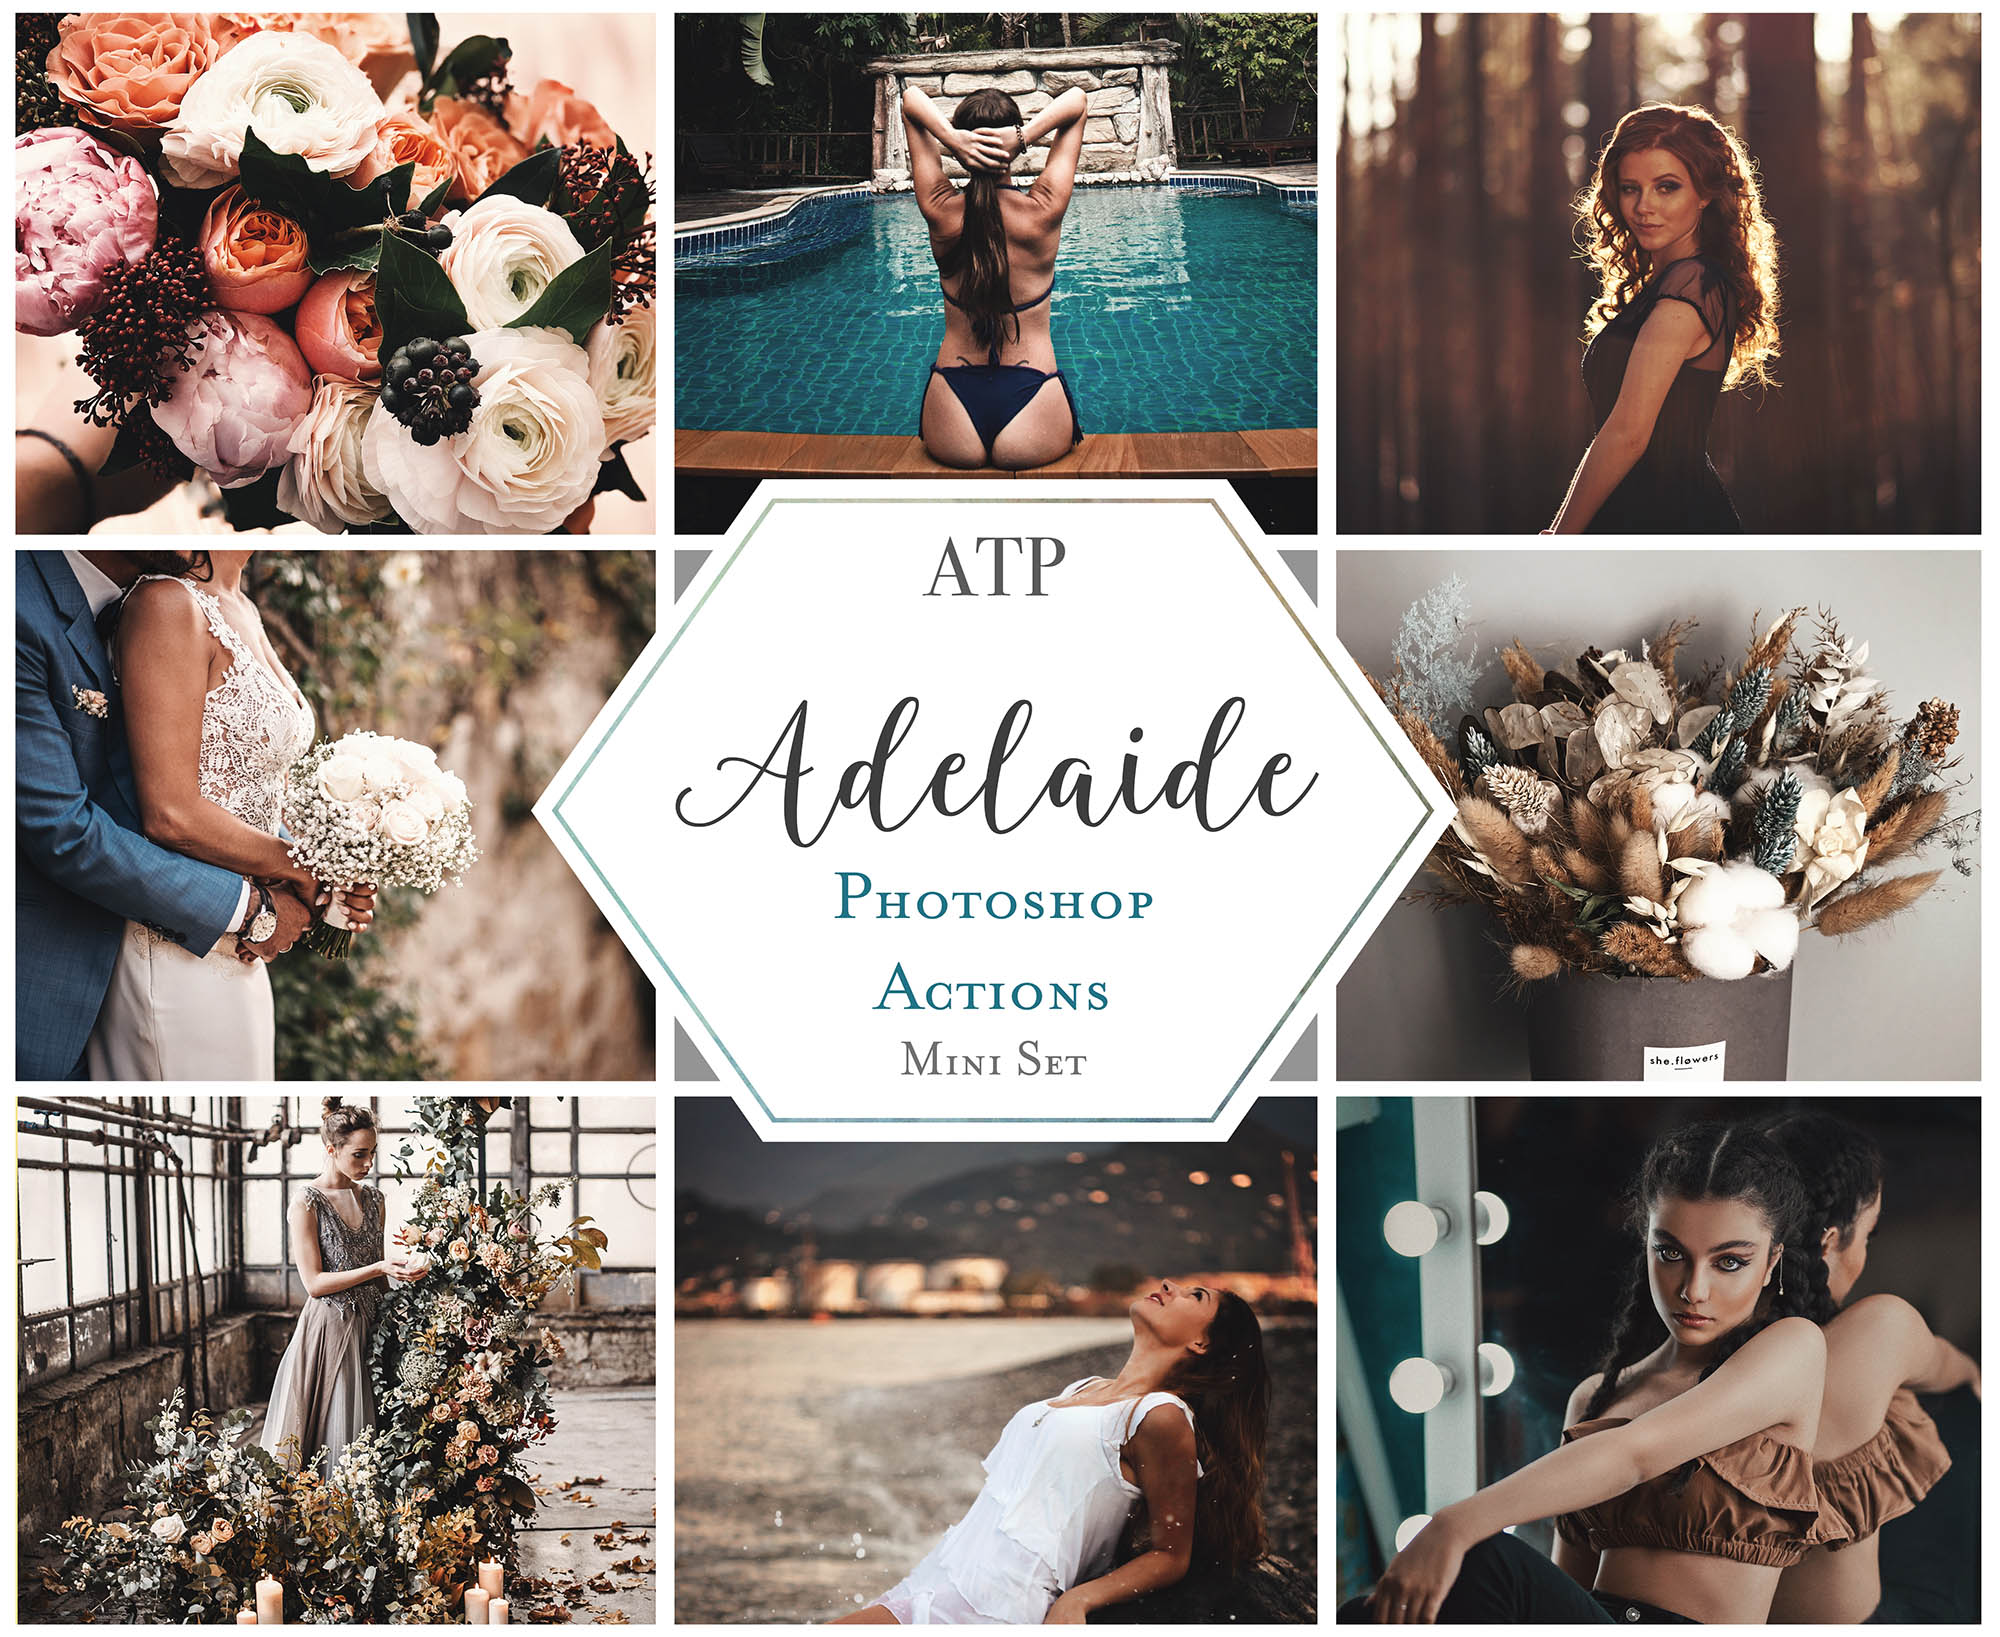 Photoshop Actions for Photography Edits. PS atn files are compatible with all versions of photoshop above CS6. Photoshop Actions for professional photographers, photo edits and Instagram influencers. Warm, Rich, light, Matte. For Wedding, Newborn, Studio Photography. By ATP Textures